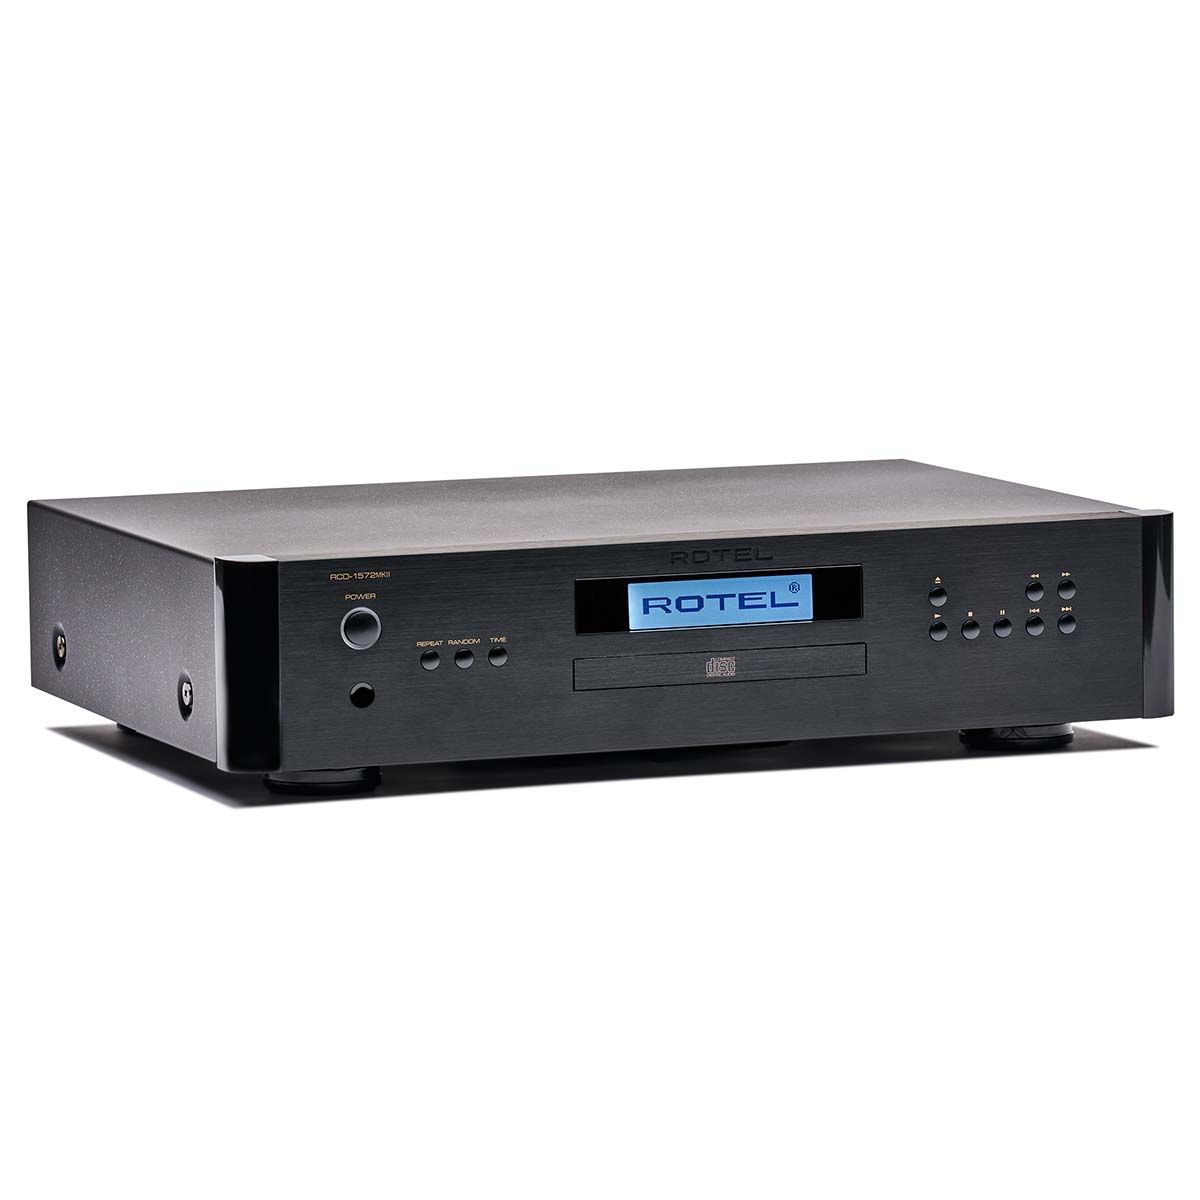 Rotel RCD-1572 MKII CD Player, Black, front angle view